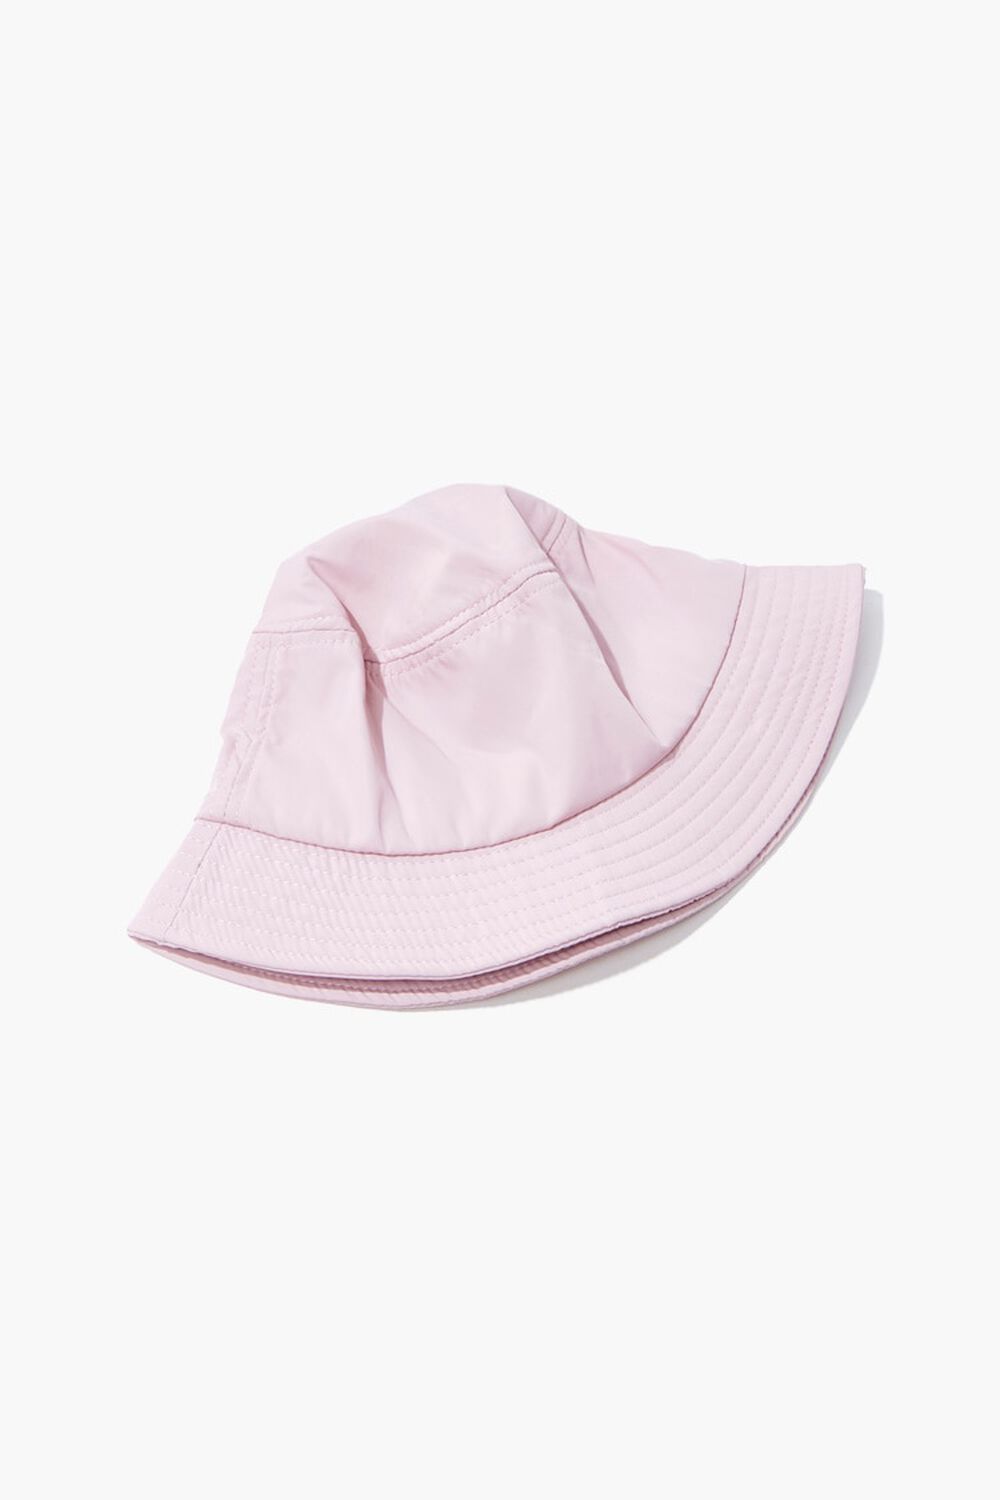 PINK Channel-Stitched Bucket Hat, image 2